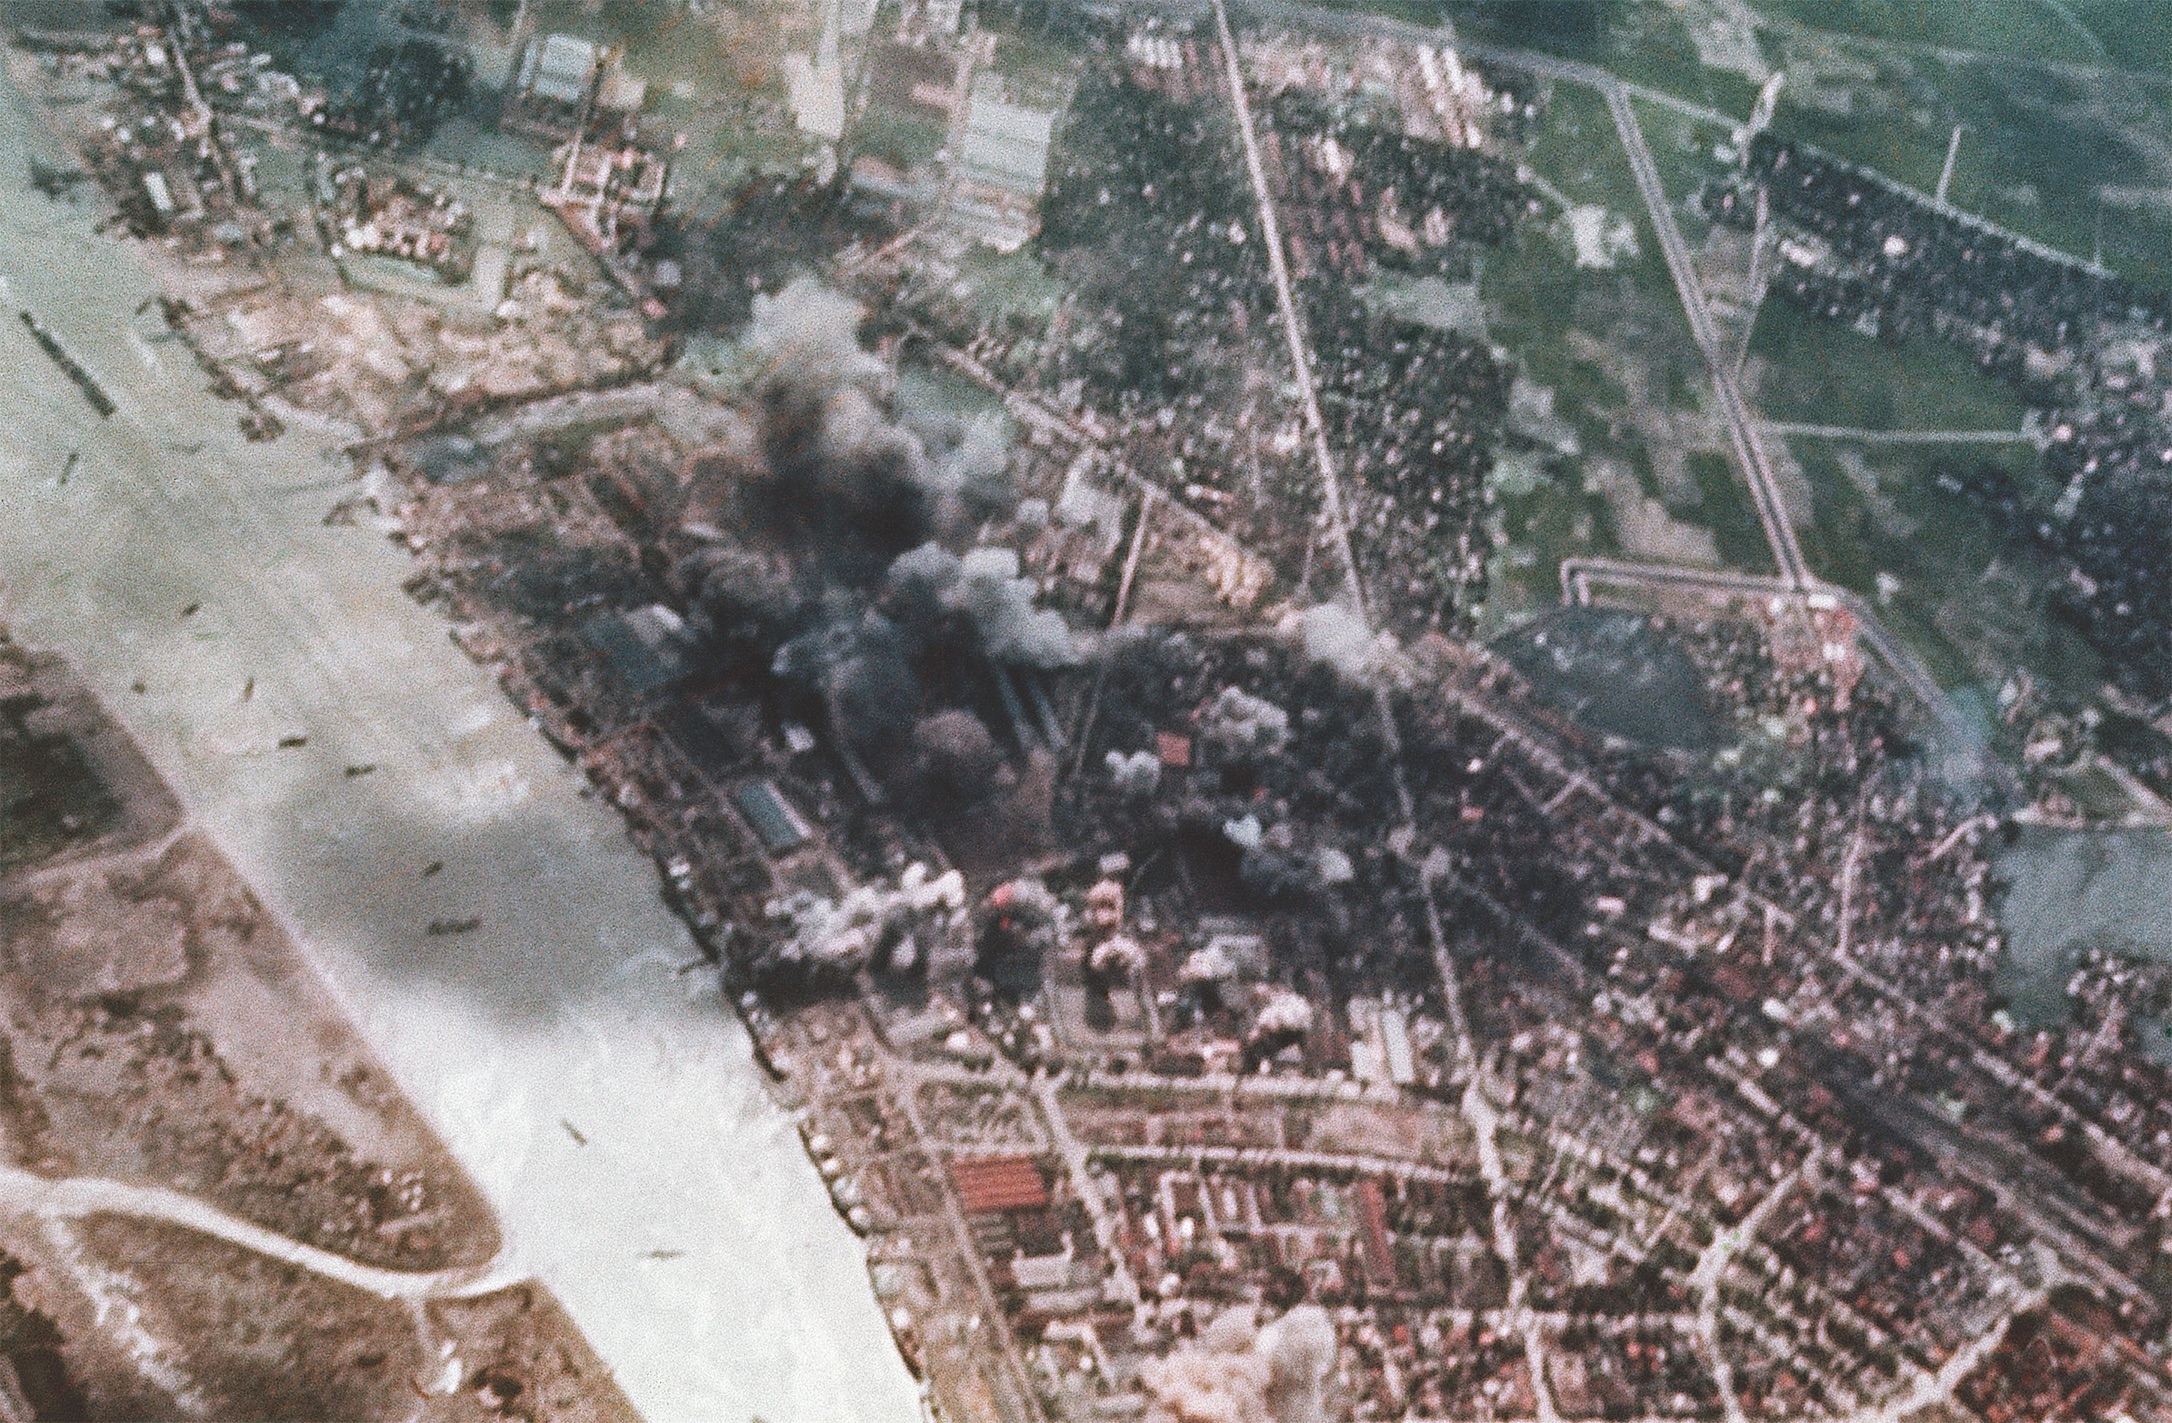 U.S. bomber strikes hit warehouses and shipping areas in Haiphong on May 17, 1972. The harbor mining on May 9 was followed by a relentless bombing campaign that began May 10. (Bettmann/Getty Images)